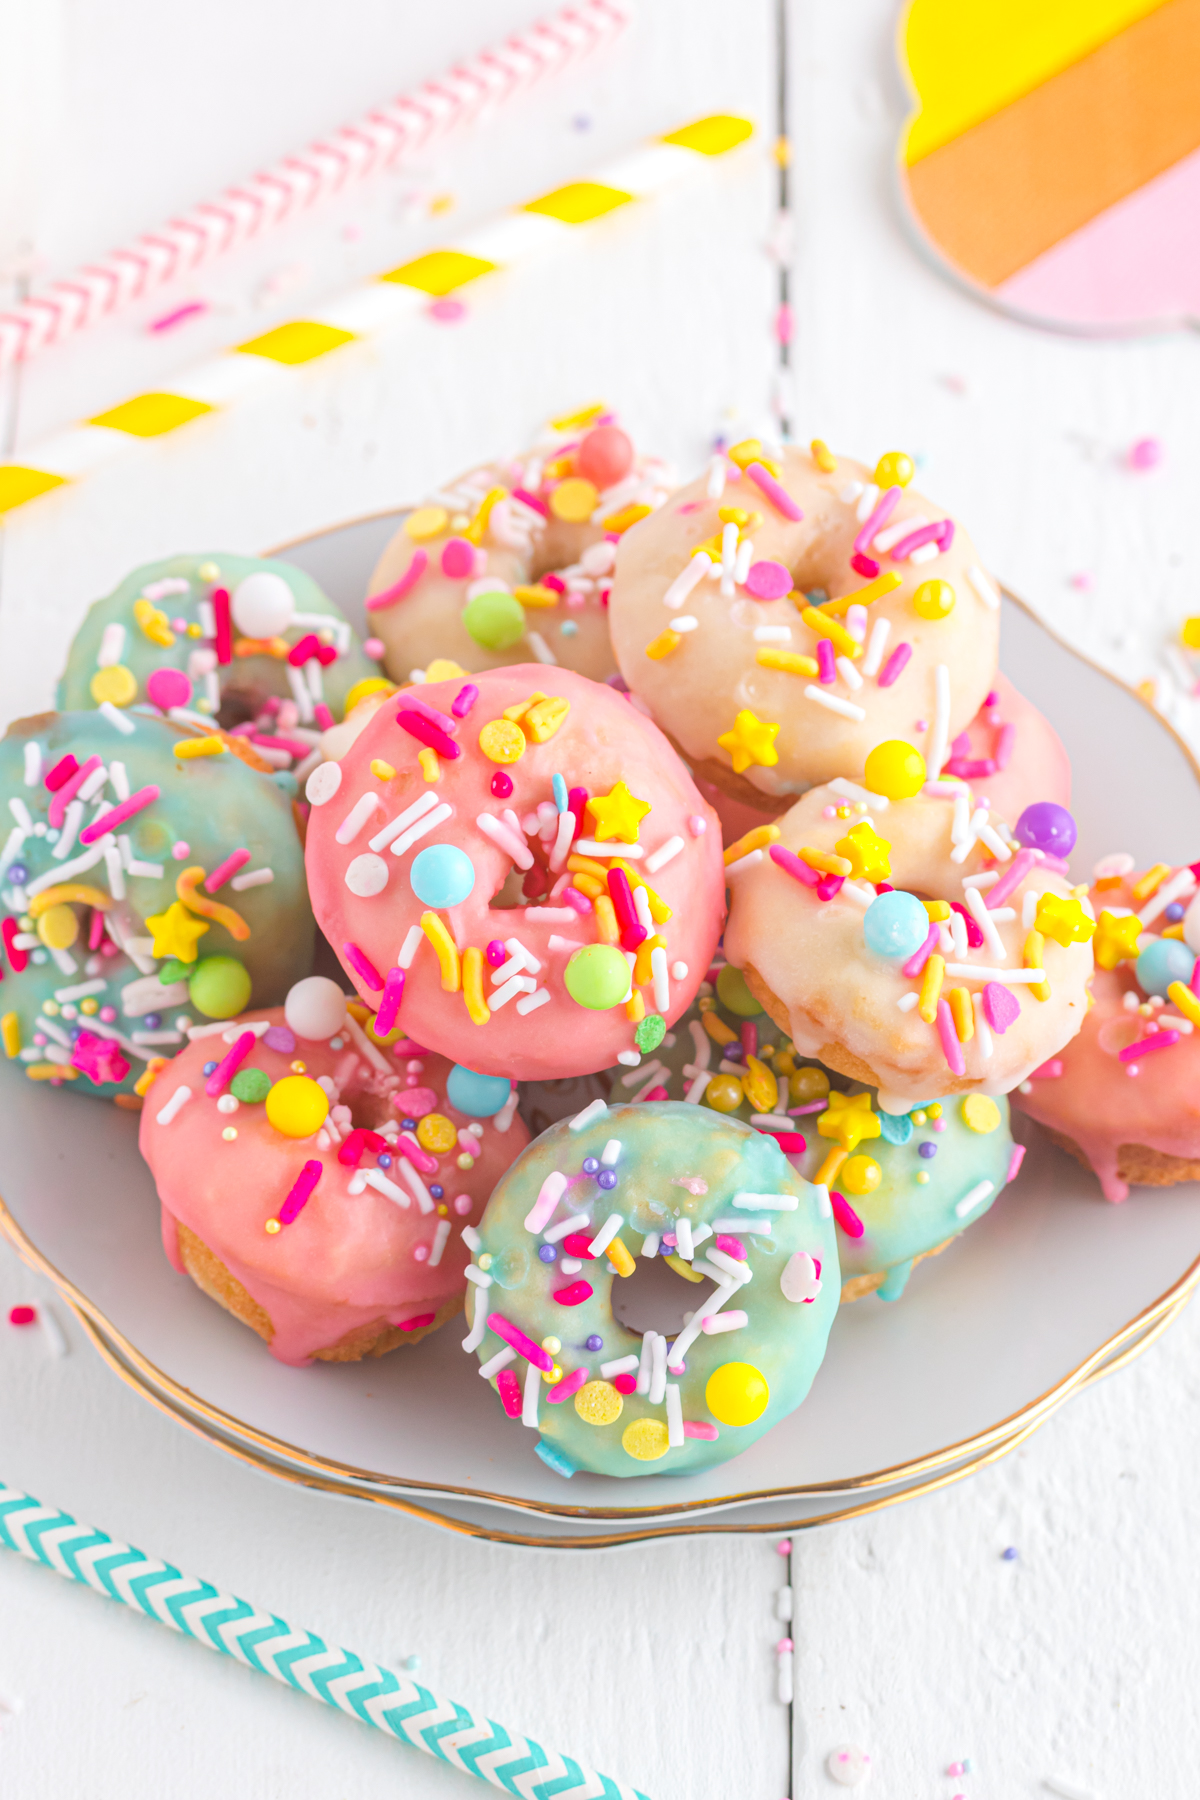 Mini donuts with colorful sprinkles on a plate.